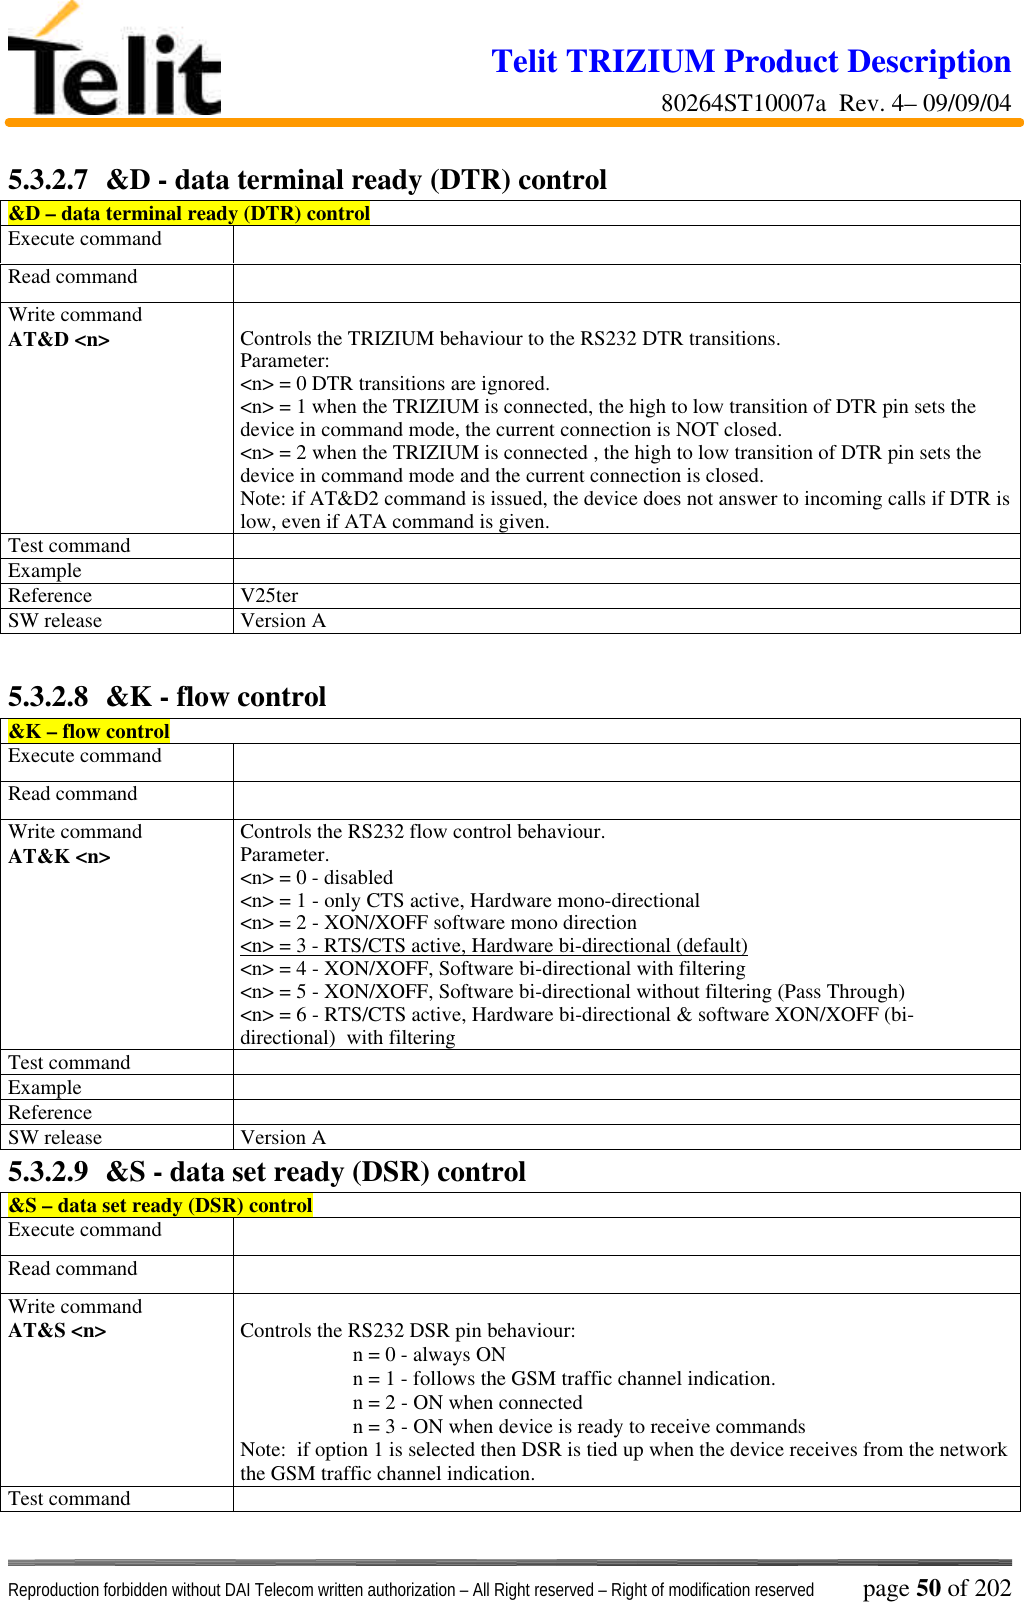 Telit TRIZIUM Product Description80264ST10007a  Rev. 4– 09/09/04Reproduction forbidden without DAI Telecom written authorization – All Right reserved – Right of modification reserved page 50 of 2025.3.2.7  &amp;D - data terminal ready (DTR) control&amp;D – data terminal ready (DTR) controlExecute commandRead commandWrite commandAT&amp;D &lt;n&gt; Controls the TRIZIUM behaviour to the RS232 DTR transitions.Parameter:&lt;n&gt; = 0 DTR transitions are ignored.&lt;n&gt; = 1 when the TRIZIUM is connected, the high to low transition of DTR pin sets thedevice in command mode, the current connection is NOT closed.&lt;n&gt; = 2 when the TRIZIUM is connected , the high to low transition of DTR pin sets thedevice in command mode and the current connection is closed.Note: if AT&amp;D2 command is issued, the device does not answer to incoming calls if DTR islow, even if ATA command is given.Test commandExampleReference V25terSW release Version A5.3.2.8  &amp;K - flow control&amp;K – flow controlExecute commandRead commandWrite commandAT&amp;K &lt;n&gt; Controls the RS232 flow control behaviour.Parameter.&lt;n&gt; = 0 - disabled&lt;n&gt; = 1 - only CTS active, Hardware mono-directional&lt;n&gt; = 2 - XON/XOFF software mono direction&lt;n&gt; = 3 - RTS/CTS active, Hardware bi-directional (default)&lt;n&gt; = 4 - XON/XOFF, Software bi-directional with filtering&lt;n&gt; = 5 - XON/XOFF, Software bi-directional without filtering (Pass Through)&lt;n&gt; = 6 - RTS/CTS active, Hardware bi-directional &amp; software XON/XOFF (bi-directional)  with filteringTest commandExampleReferenceSW release Version A5.3.2.9  &amp;S - data set ready (DSR) control&amp;S – data set ready (DSR) controlExecute commandRead commandWrite commandAT&amp;S &lt;n&gt; Controls the RS232 DSR pin behaviour:n = 0 - always ONn = 1 - follows the GSM traffic channel indication.n = 2 - ON when connectedn = 3 - ON when device is ready to receive commandsNote:  if option 1 is selected then DSR is tied up when the device receives from the networkthe GSM traffic channel indication.Test command